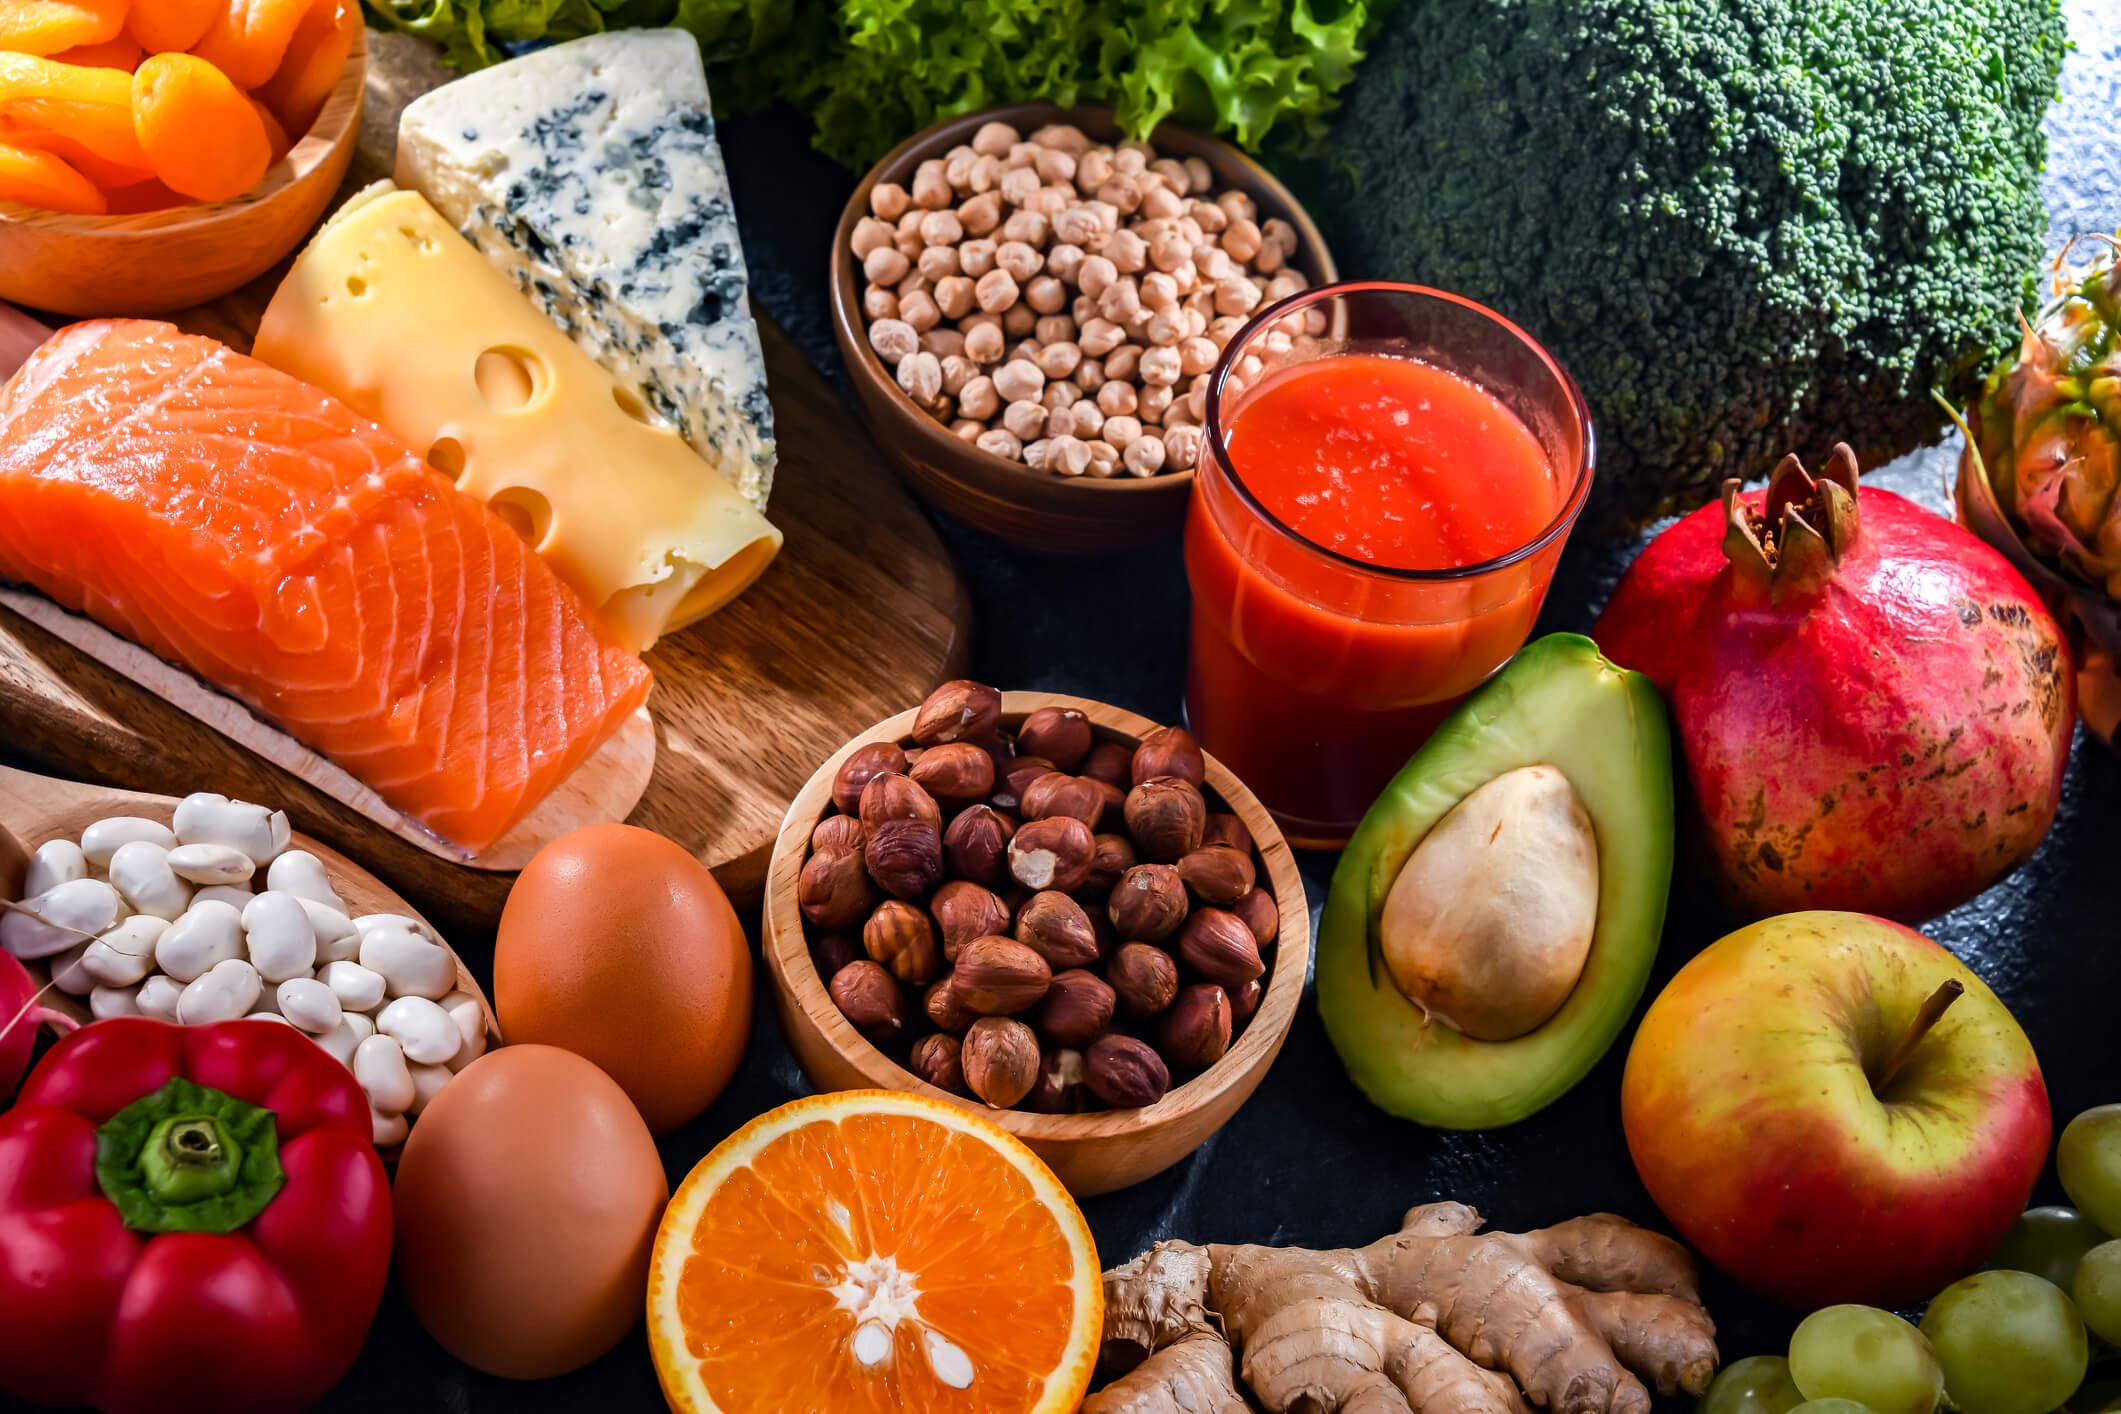 Healthy foods on a table like, a piece of salmon, bowl of red beans, eggs, fruit, & veggies...